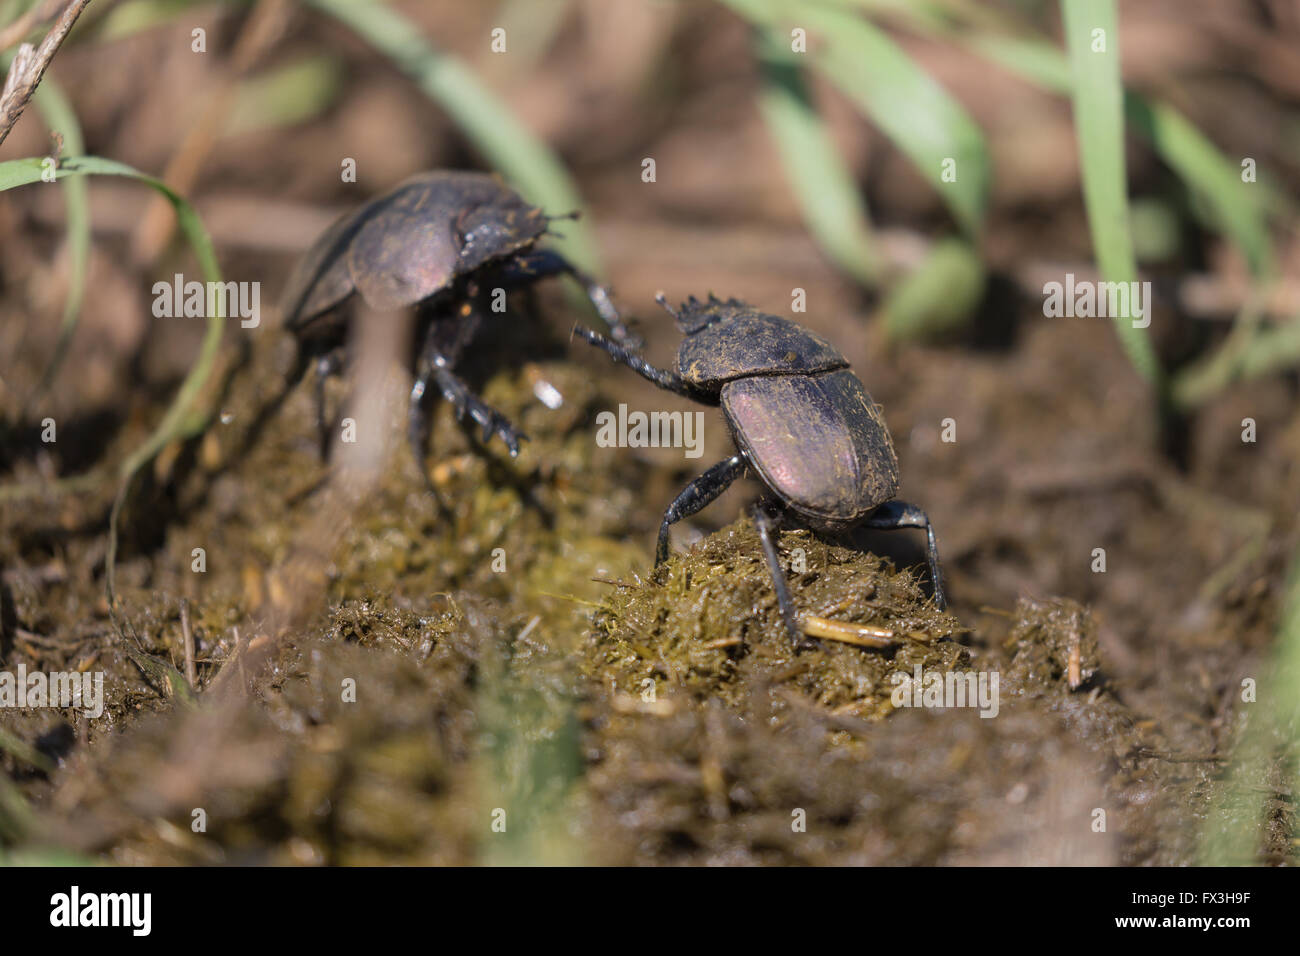 Dung beetles fight over a ball of dung in Kruger National Park, South Africa Stock Photo